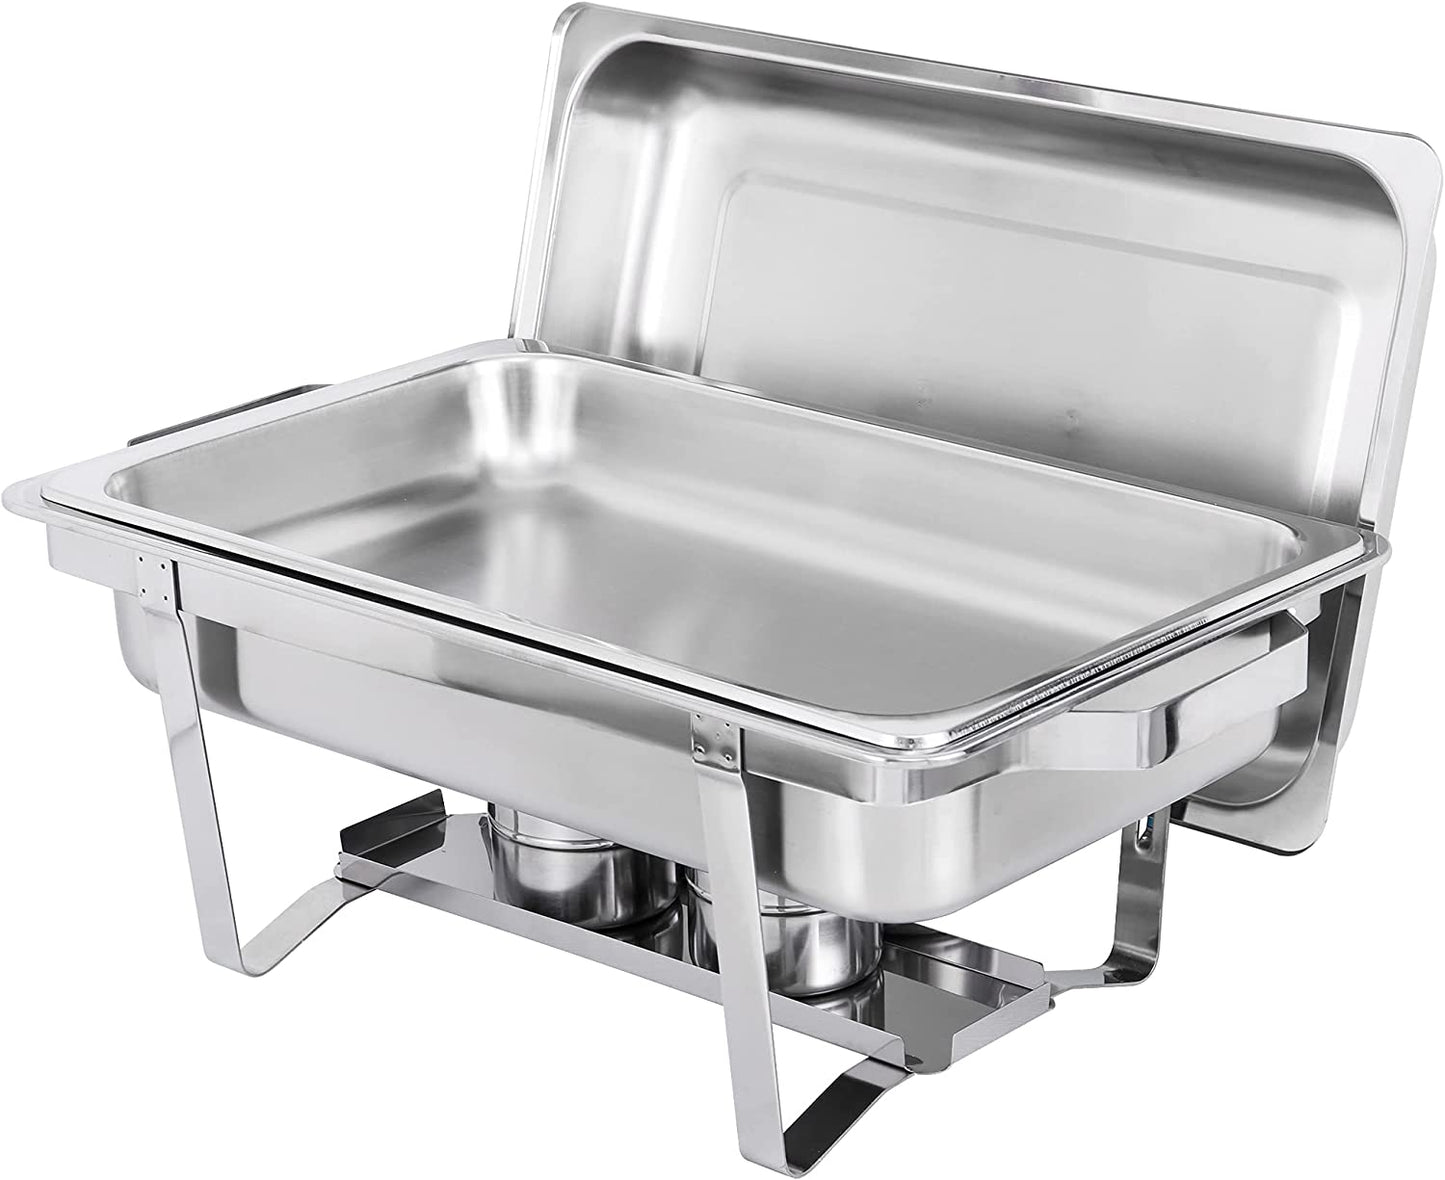 4 Packs Chafing Dish Buffet Set, 8 Quart Stainless Steel Buffet Servers and Warmers for Party Catering, Complete Chafer Set with Water Pan, Chafing Fuel Holder